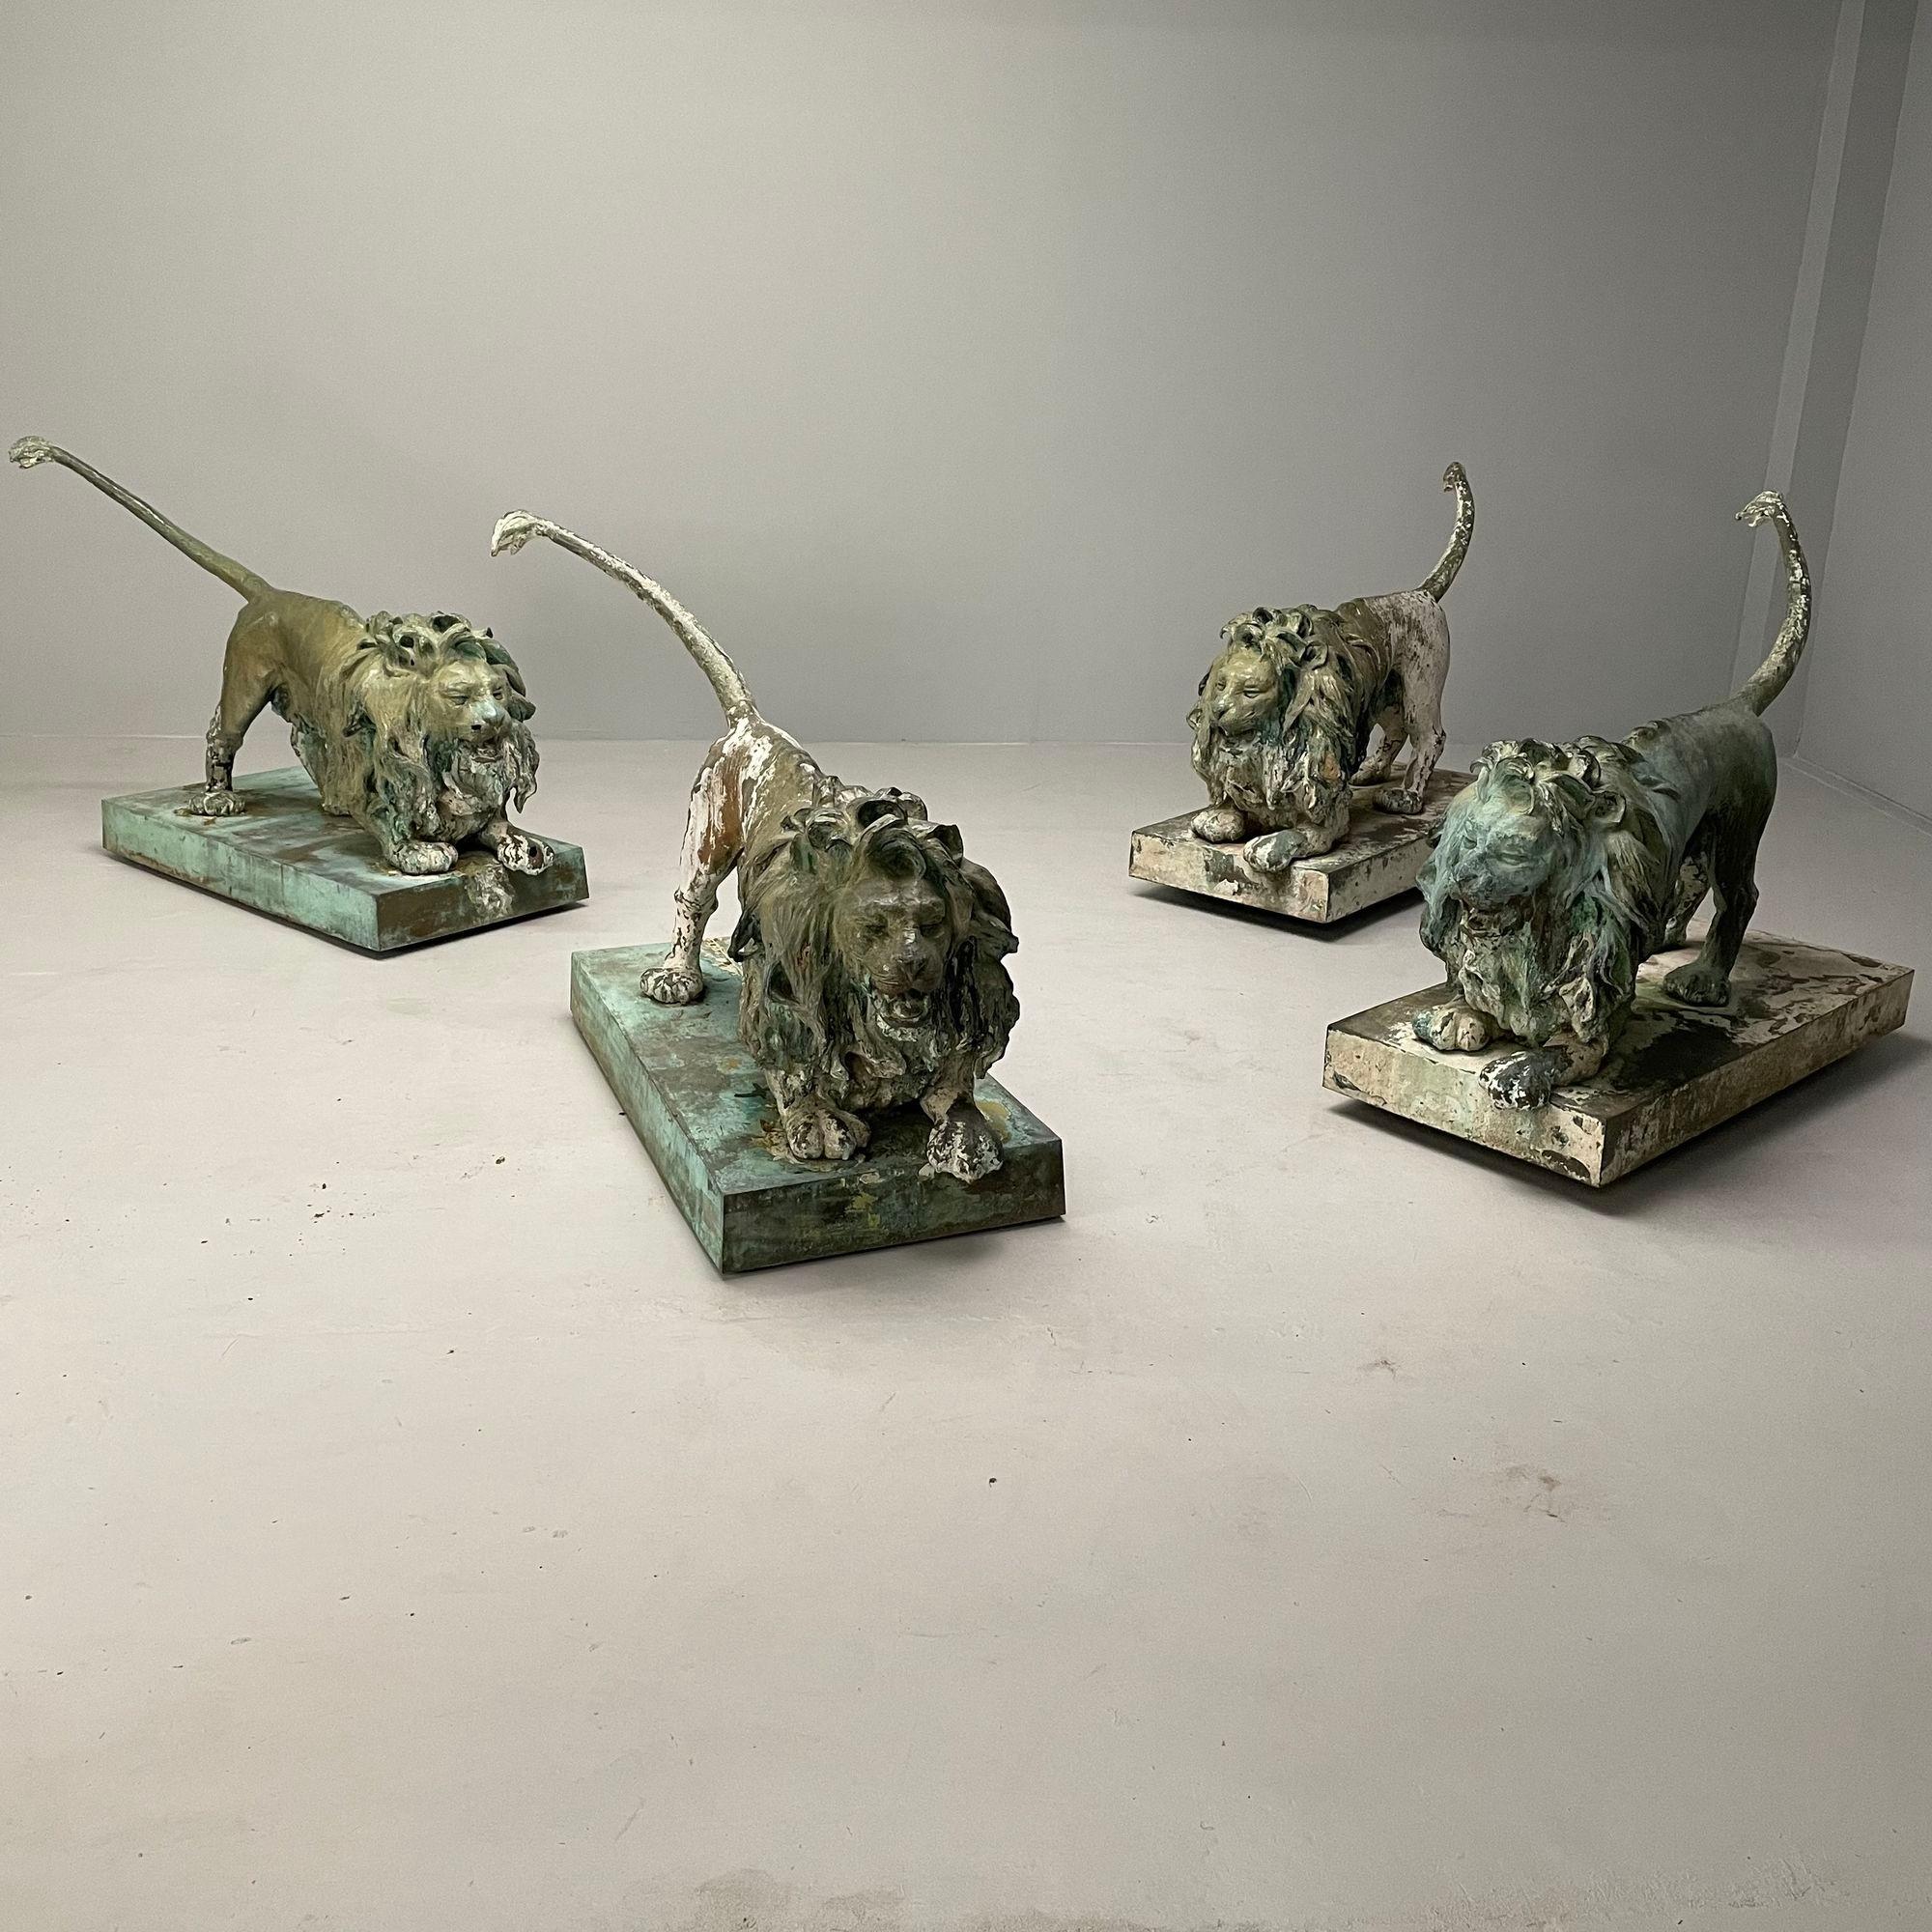 Renaissance Lion Fountains, Lifesize Outdoor Statues, Patinated Bronze, England, 1860s For Sale